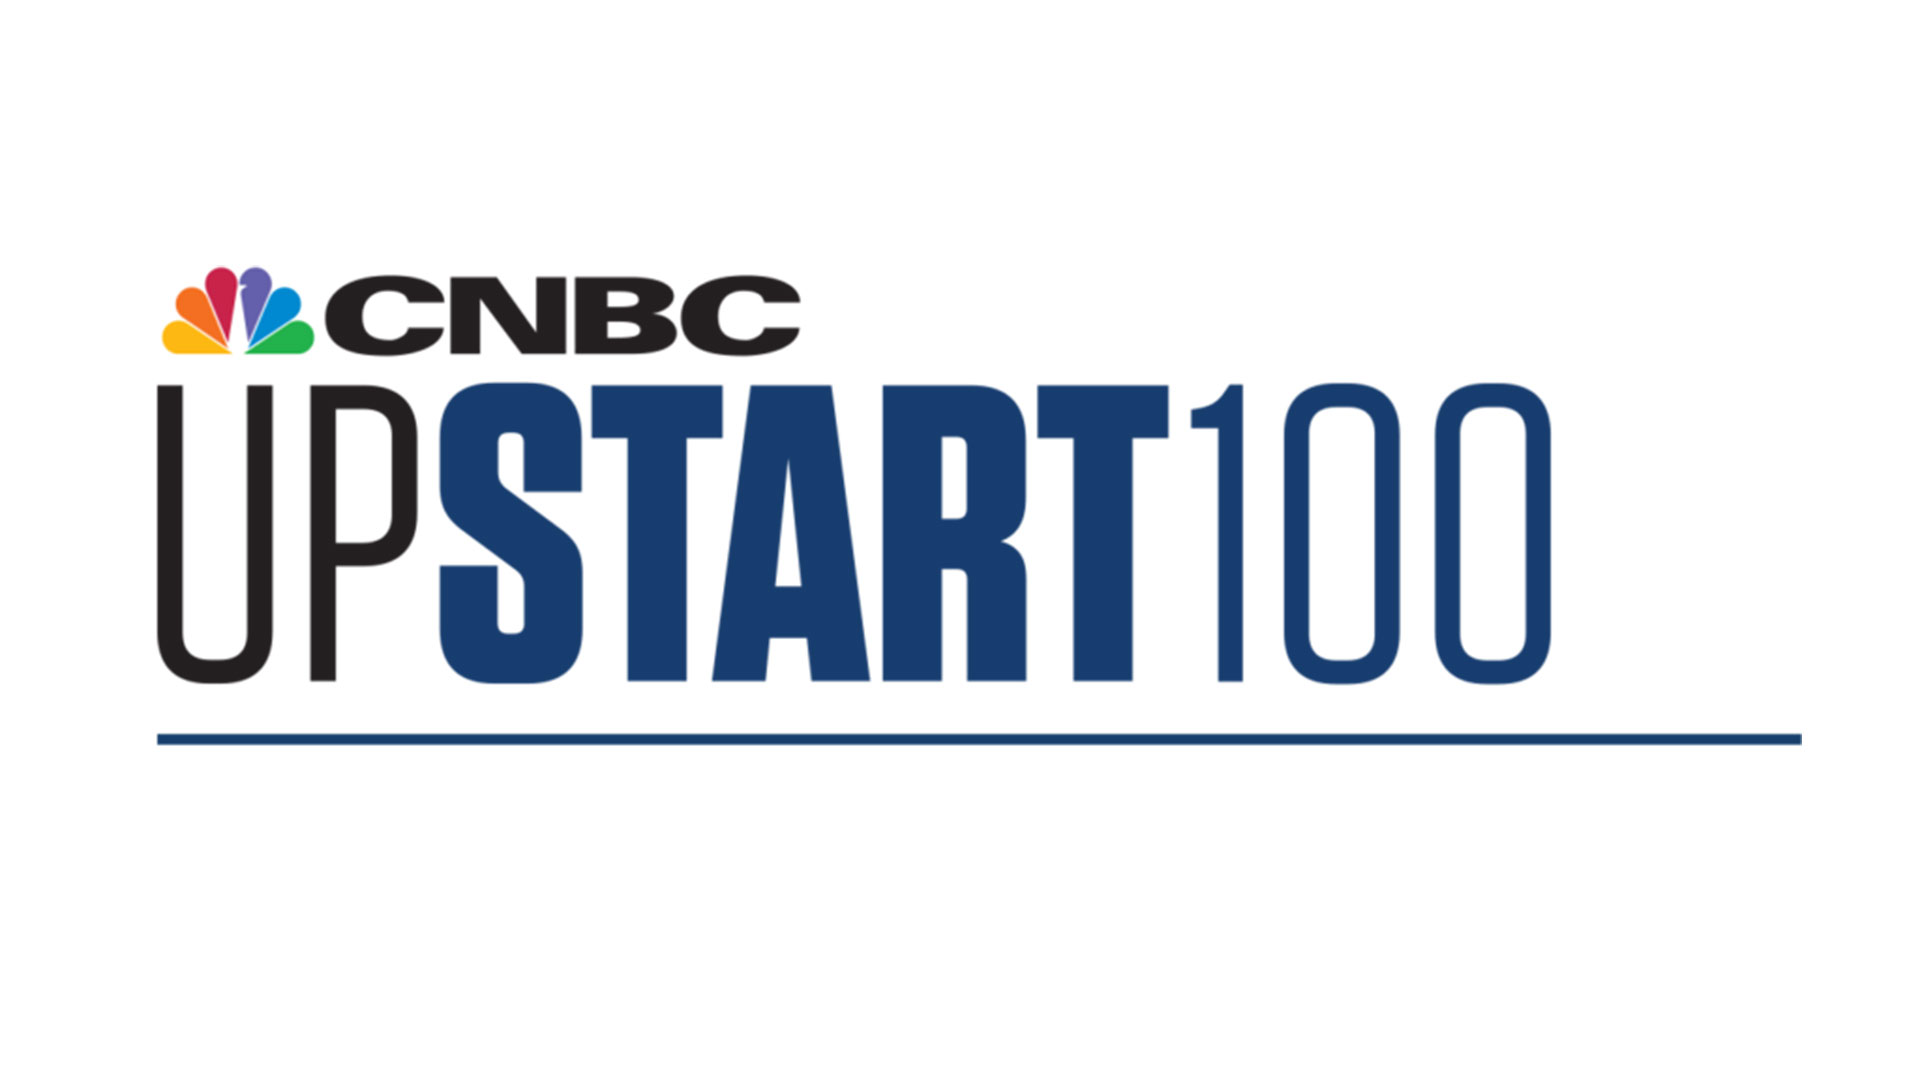 Hypergiant Makes CNBC 100 Promising Startups to Watch List